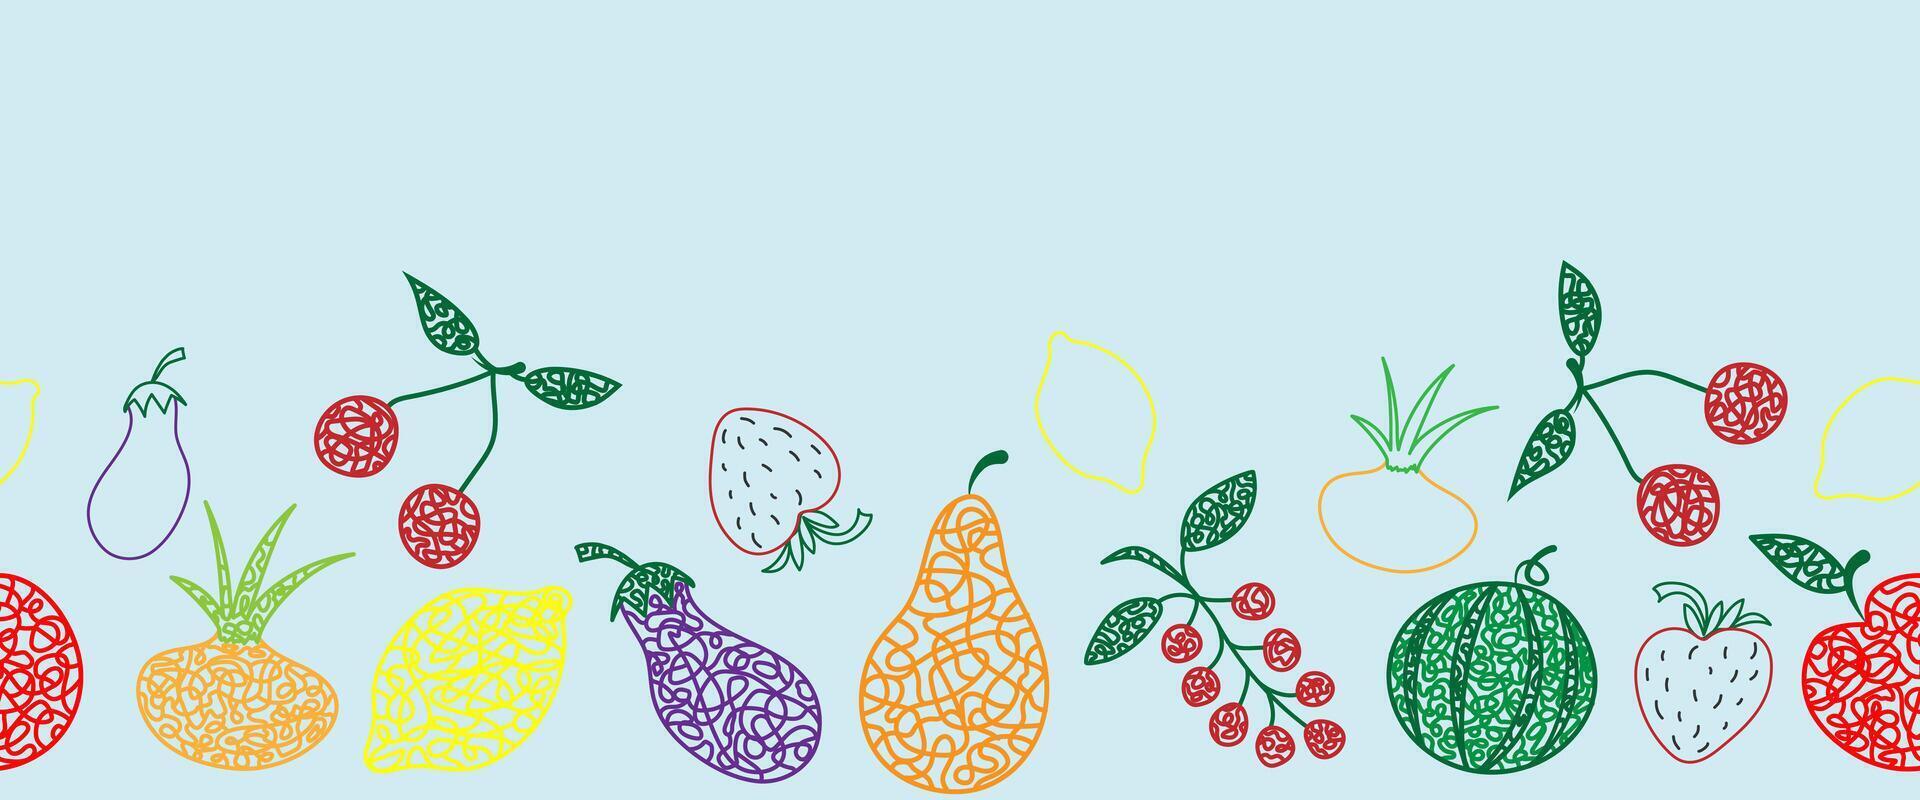 Seamless pattern border with hand drawn watermelon, cherry, apple, pear, lemon, strawberry, eggplant, currant, onion on blue background in childrens naive style. vector